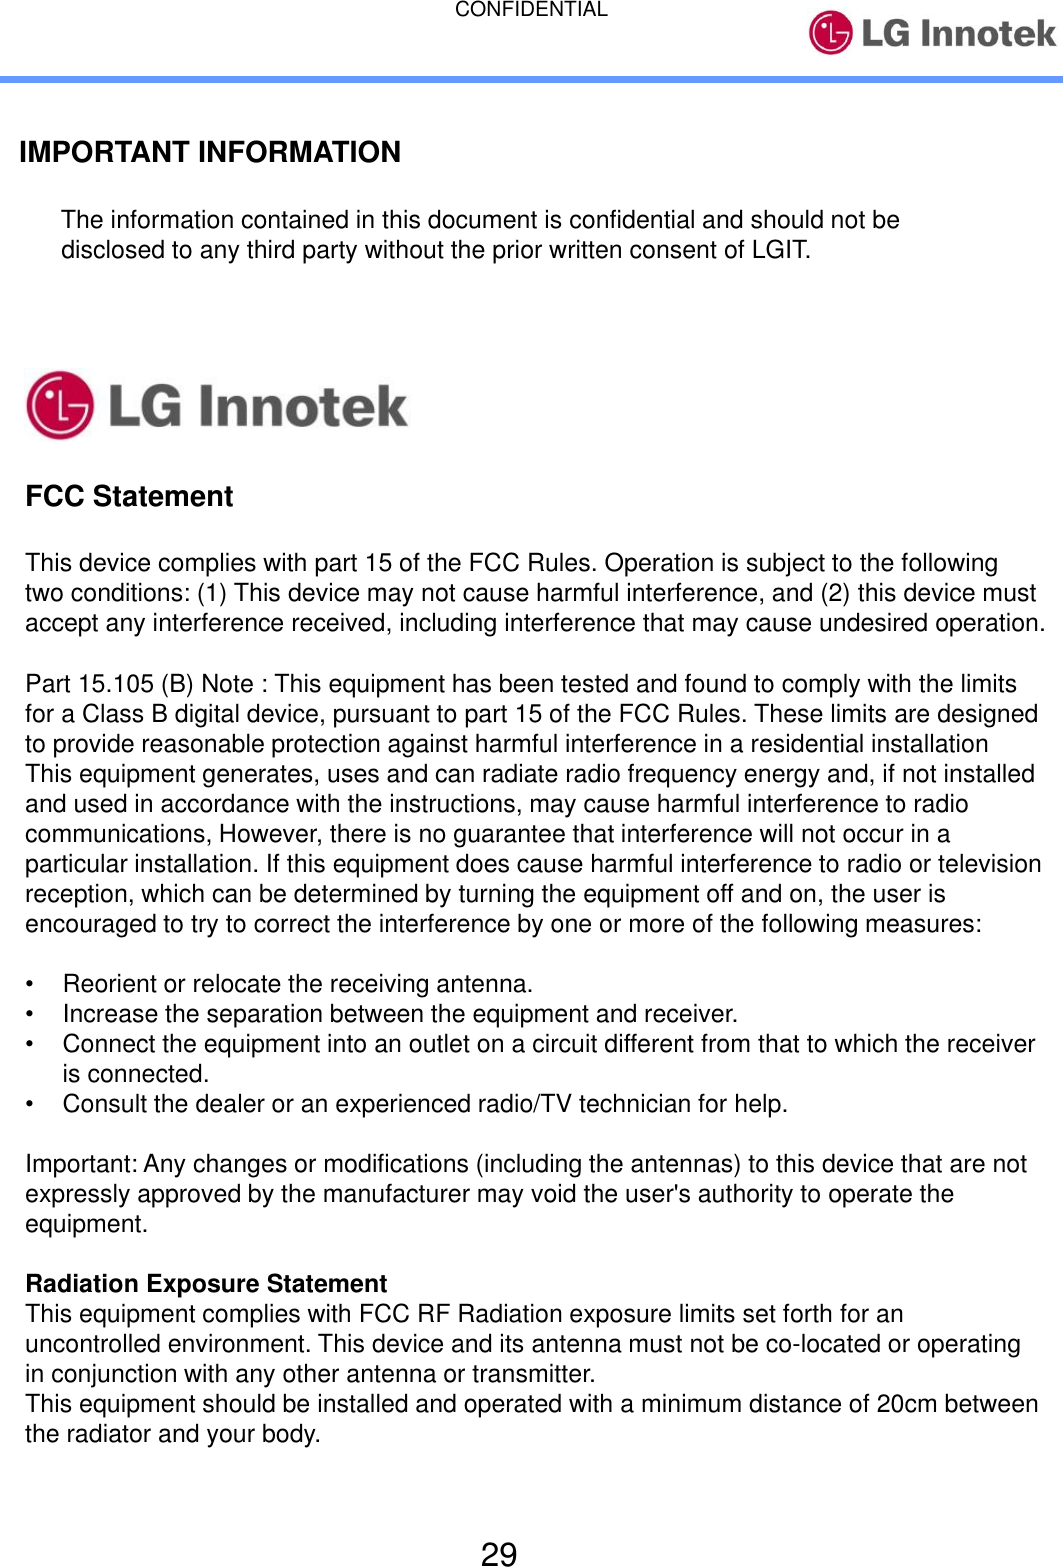 CONFIDENTIAL 29 IMPORTANT INFORMATION   The information contained in this document is confidential and should not be   disclosed to any third party without the prior written consent of LGIT. FCC Statement This device complies with part 15 of the FCC Rules. Operation is subject to the following two conditions: (1) This device may not cause harmful interference, and (2) this device must accept any interference received, including interference that may cause undesired operation. Part 15.105 (B) Note : This equipment has been tested and found to comply with the limits for a Class B digital device, pursuant to part 15 of the FCC Rules. These limits are designed to provide reasonable protection against harmful interference in a residential installation This equipment generates, uses and can radiate radio frequency energy and, if not installed and used in accordance with the instructions, may cause harmful interference to radio communications, However, there is no guarantee that interference will not occur in a particular installation. If this equipment does cause harmful interference to radio or television reception, which can be determined by turning the equipment off and on, the user is encouraged to try to correct the interference by one or more of the following measures: •Reorient or relocate the receiving antenna.•Increase the separation between the equipment and receiver.•Connect the equipment into an outlet on a circuit different from that to which the receiveris connected.•Consult the dealer or an experienced radio/TV technician for help.Important: Any changes or modifications (including the antennas) to this device that are not expressly approved by the manufacturer may void the user&apos;s authority to operate the equipment. Radiation Exposure Statement This equipment complies with FCC RF Radiation exposure limits set forth for an uncontrolled environment. This device and its antenna must not be co-located or operating in conjunction with any other antenna or transmitter. This equipment should be installed and operated with a minimum distance of 20cm between the radiator and your body. 